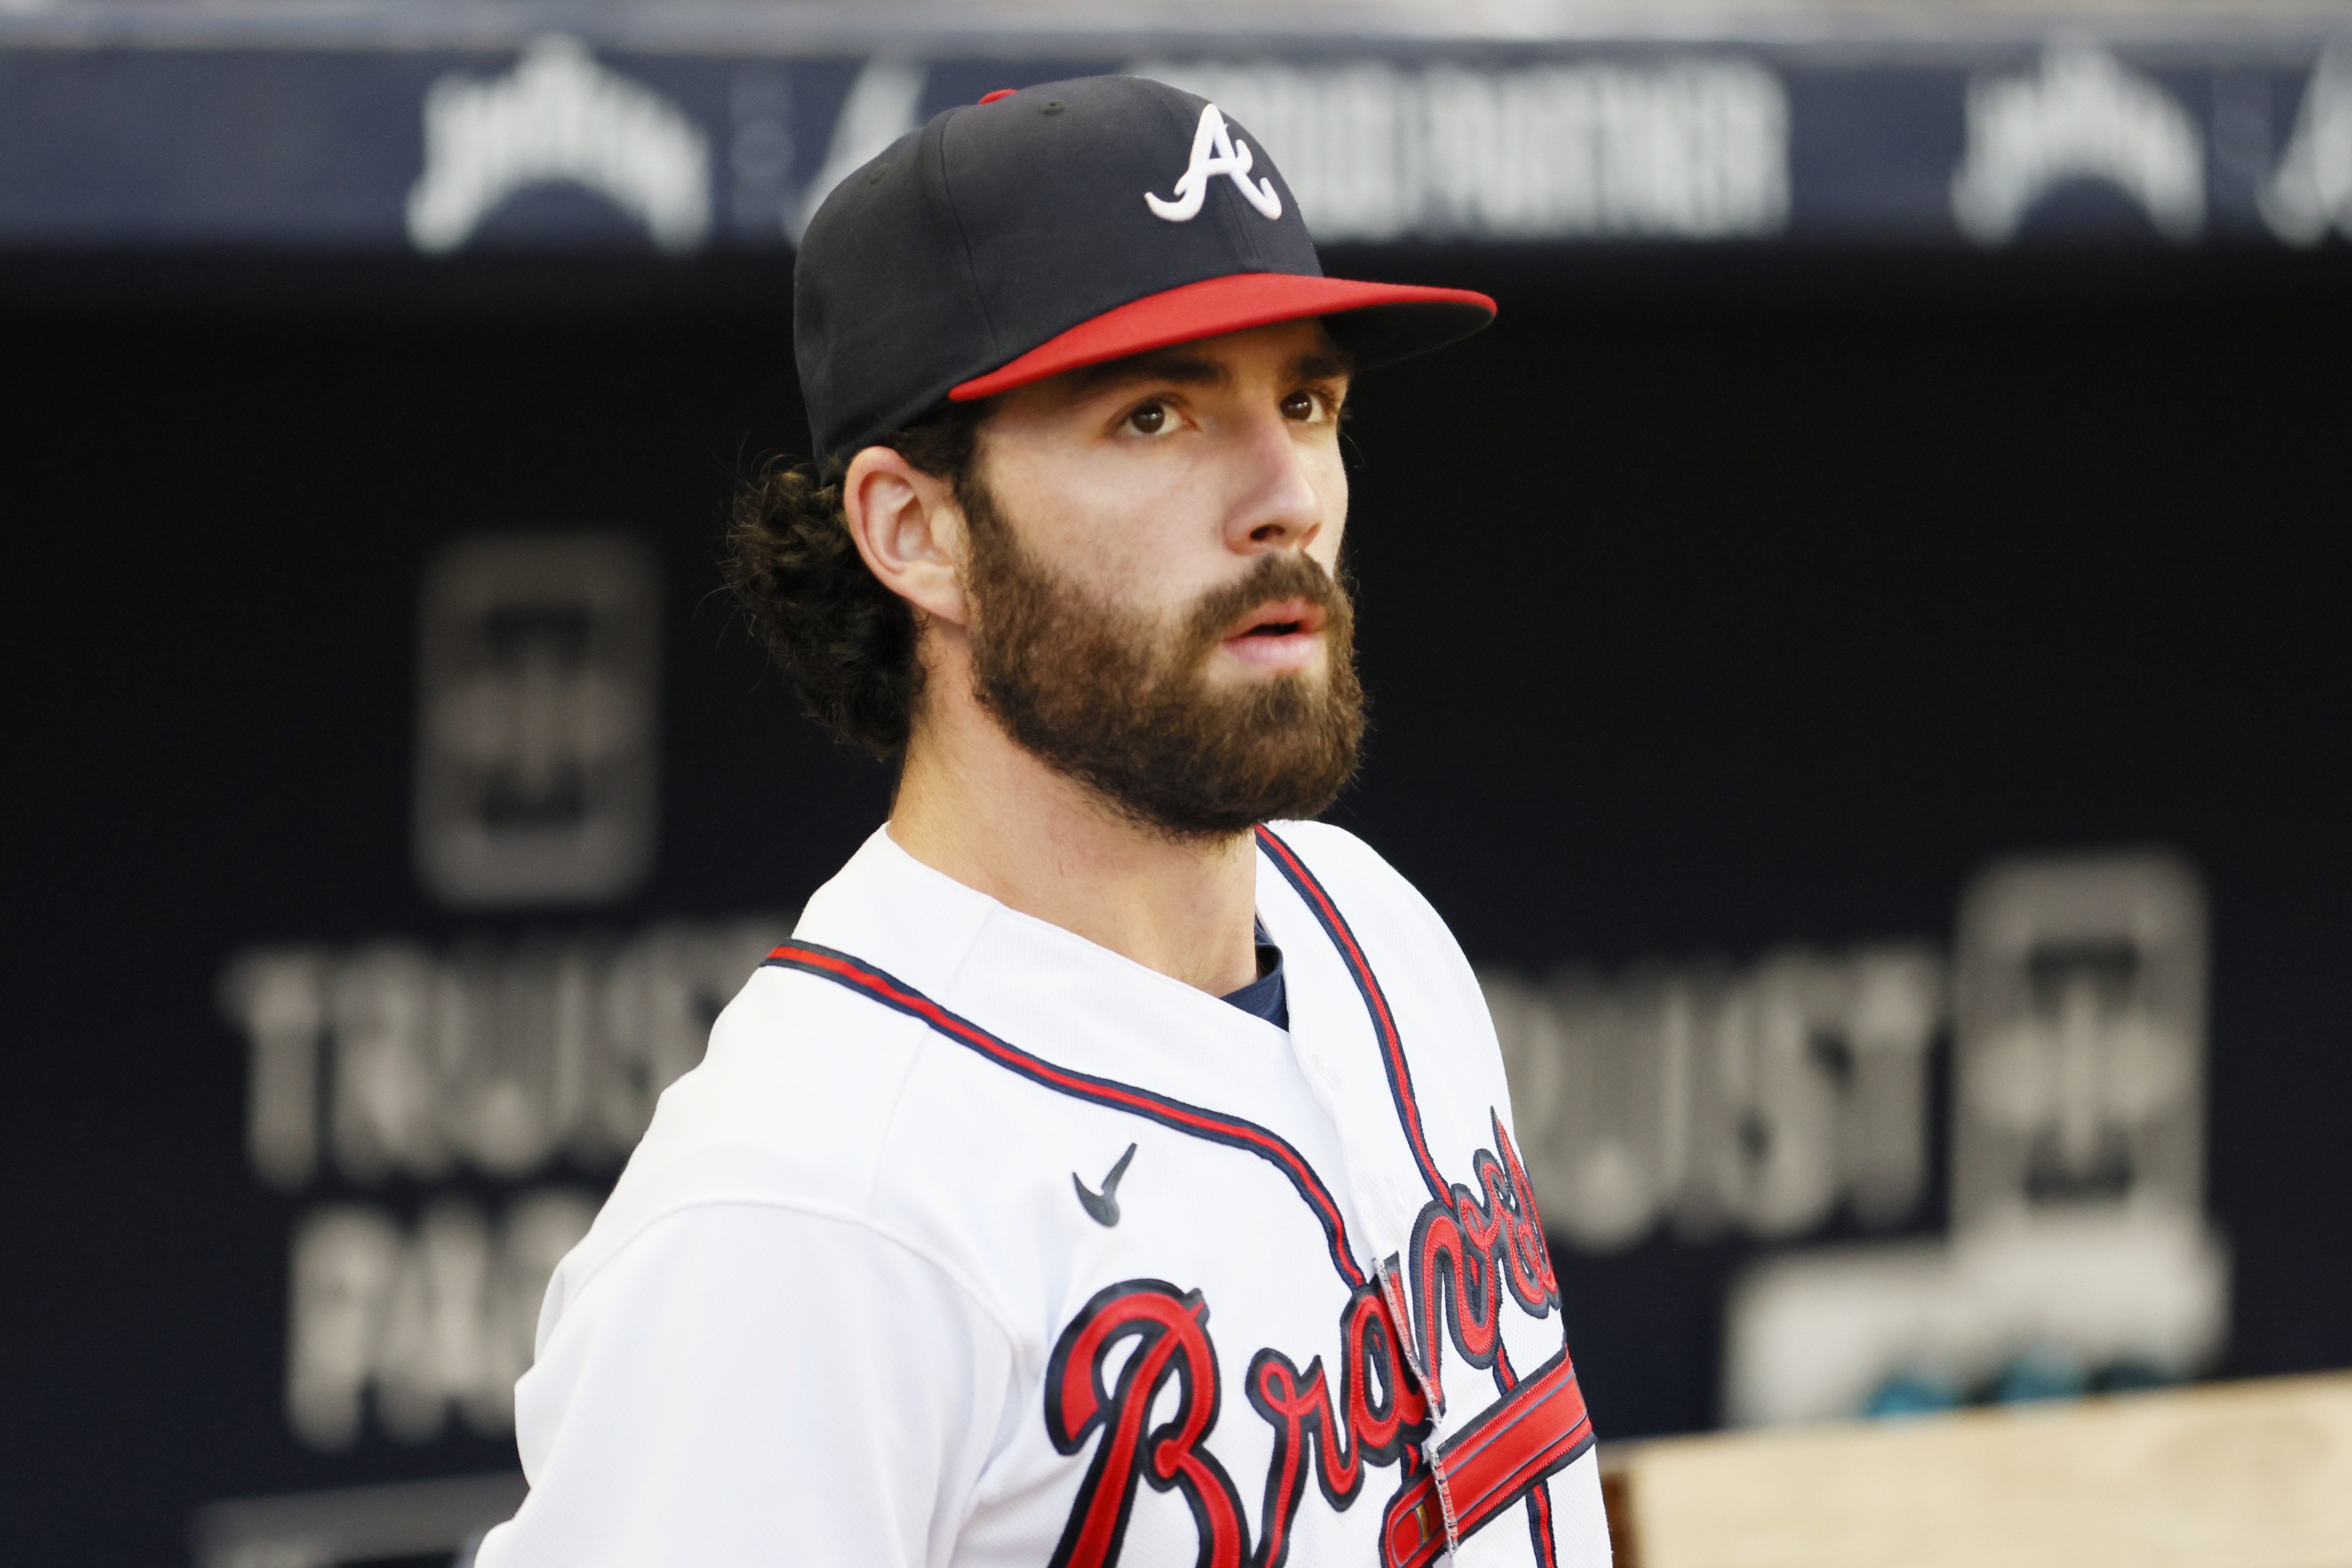 Dansby Swanson on X: Thank you @express for coming to ATL to hang